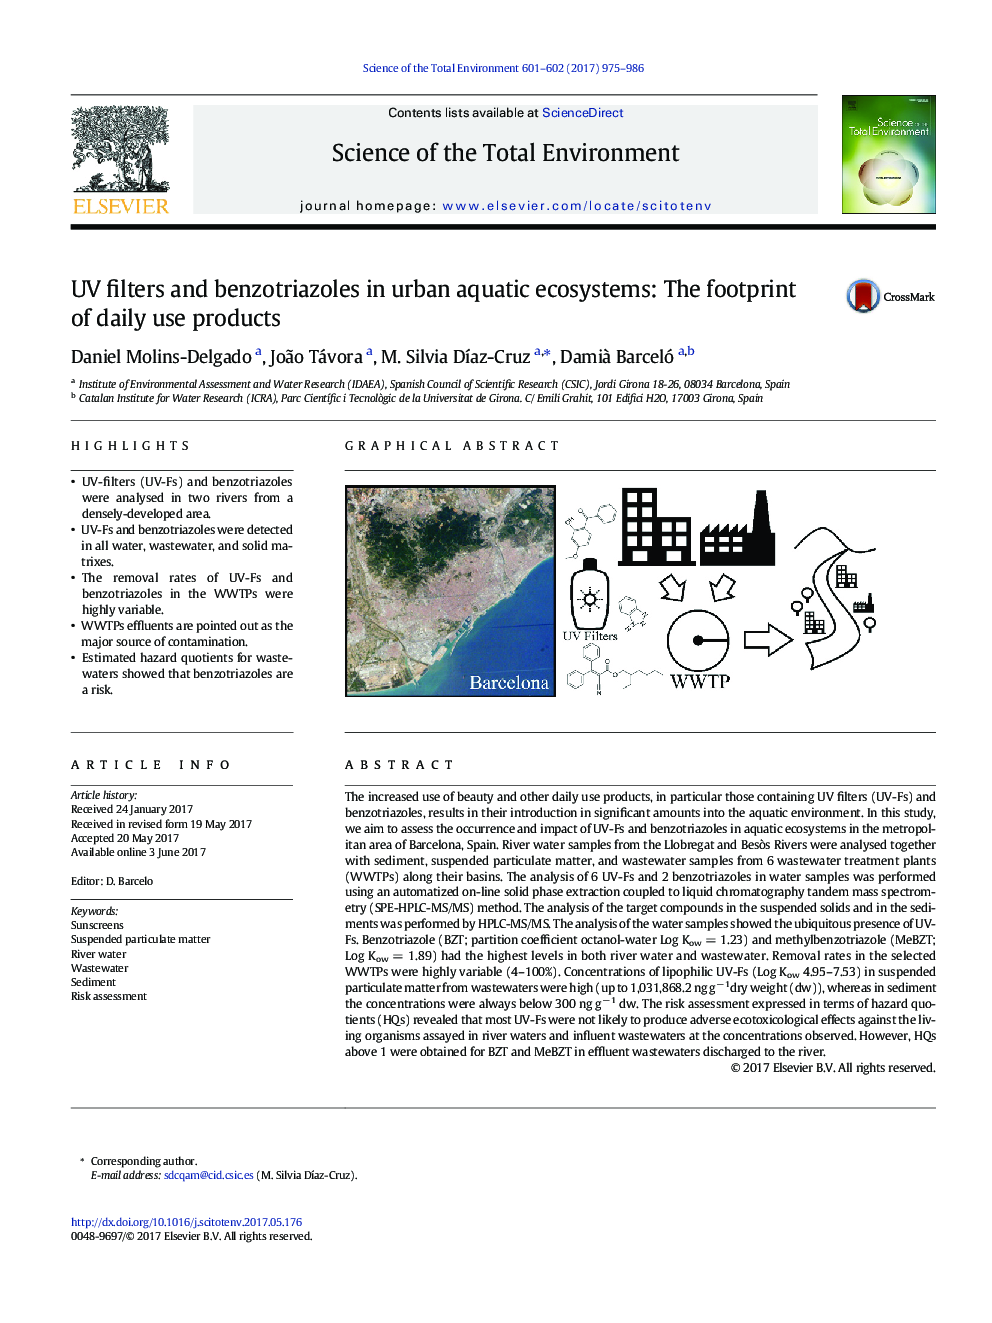 UV filters and benzotriazoles in urban aquatic ecosystems: The footprint of daily use products